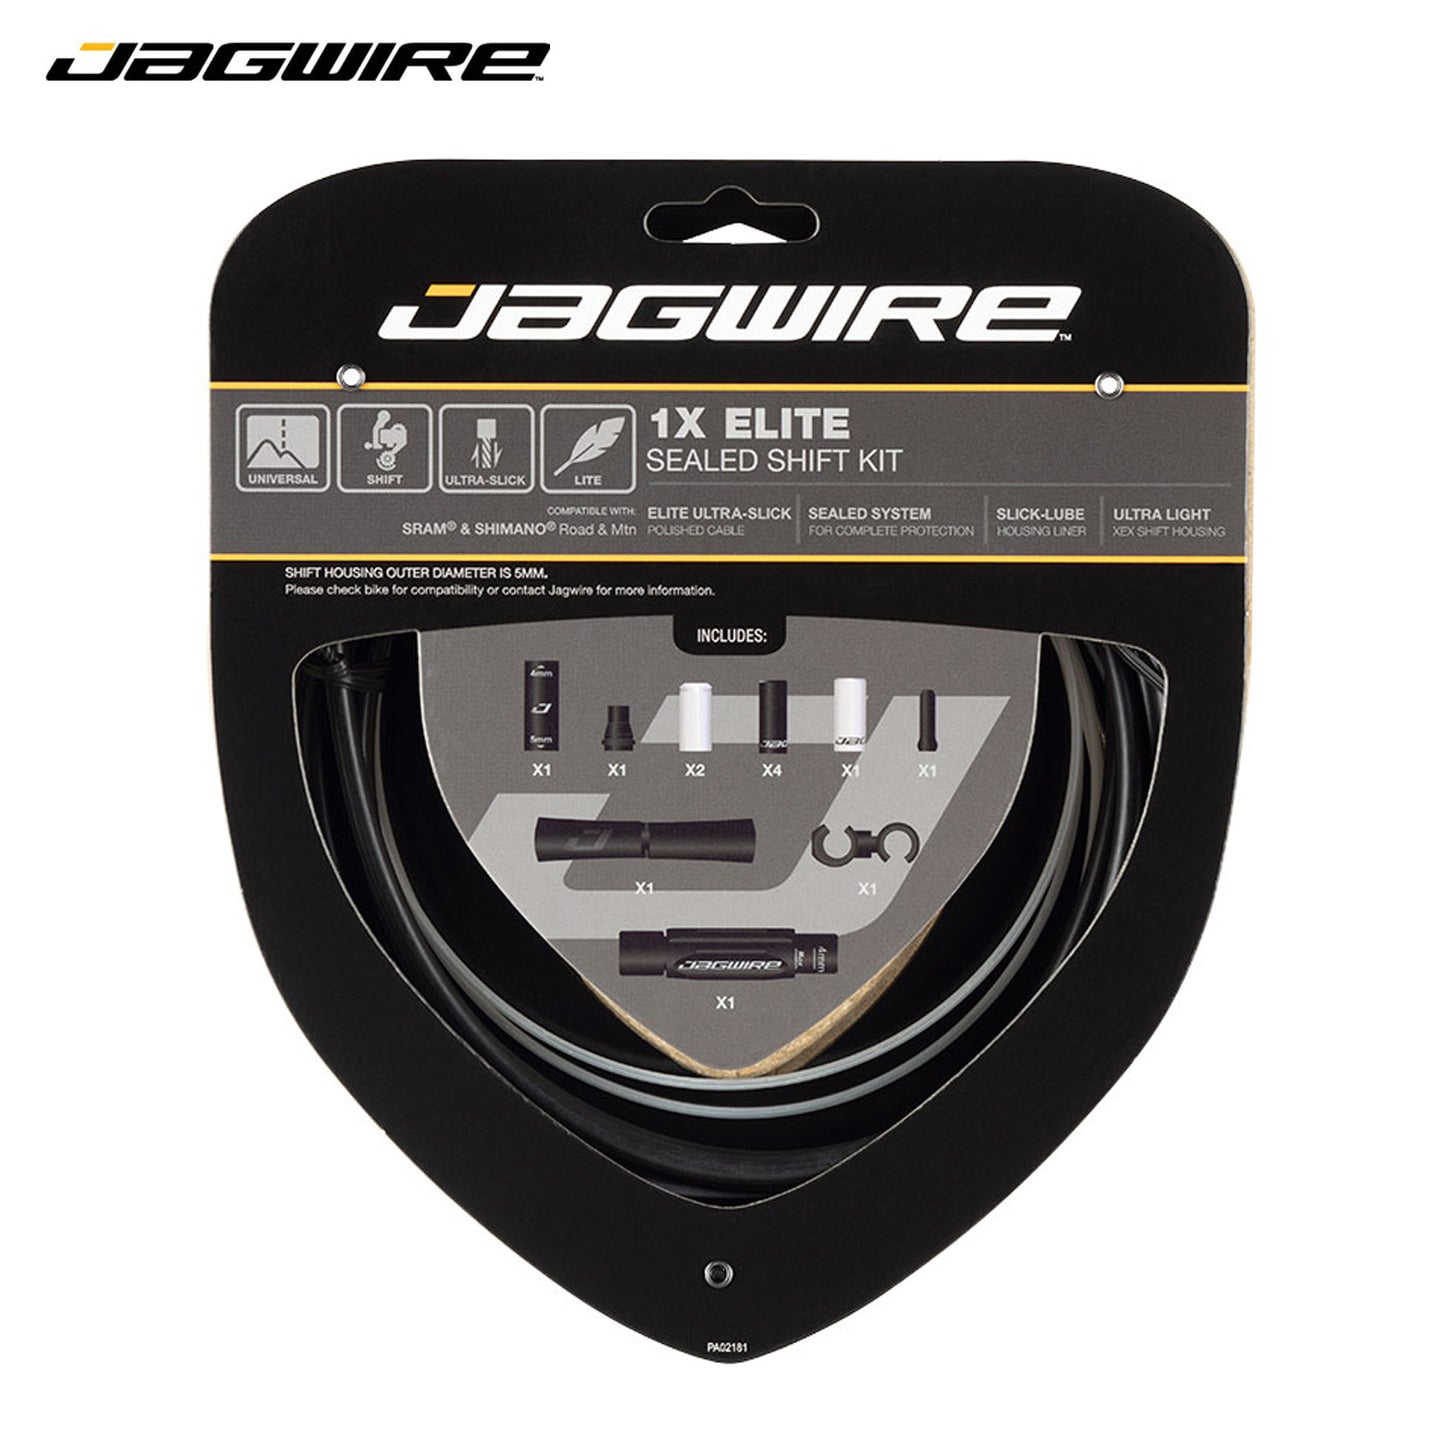 Jagwire 1x Elite Sealed Shift Cable Kit Set for Road / MTB / SRAM / Shimano - Stealth Black